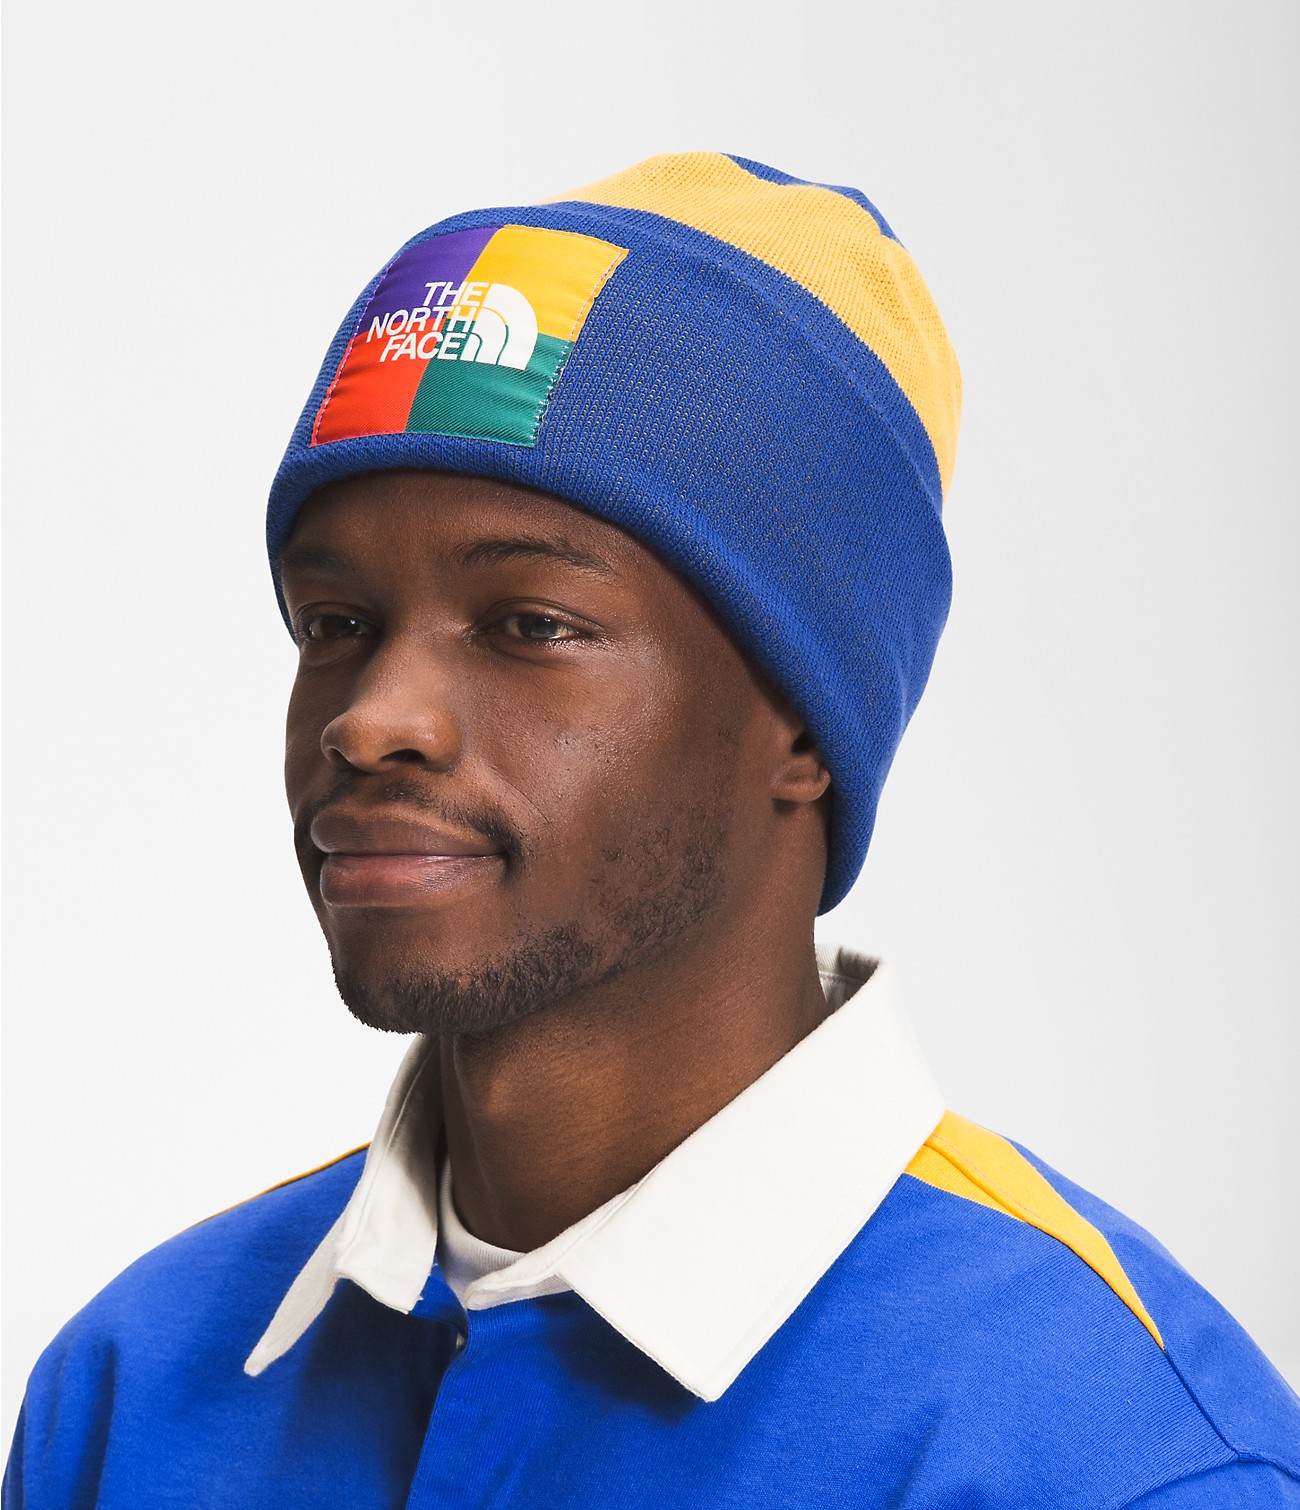 Color Block Knit Beanie | The North Face